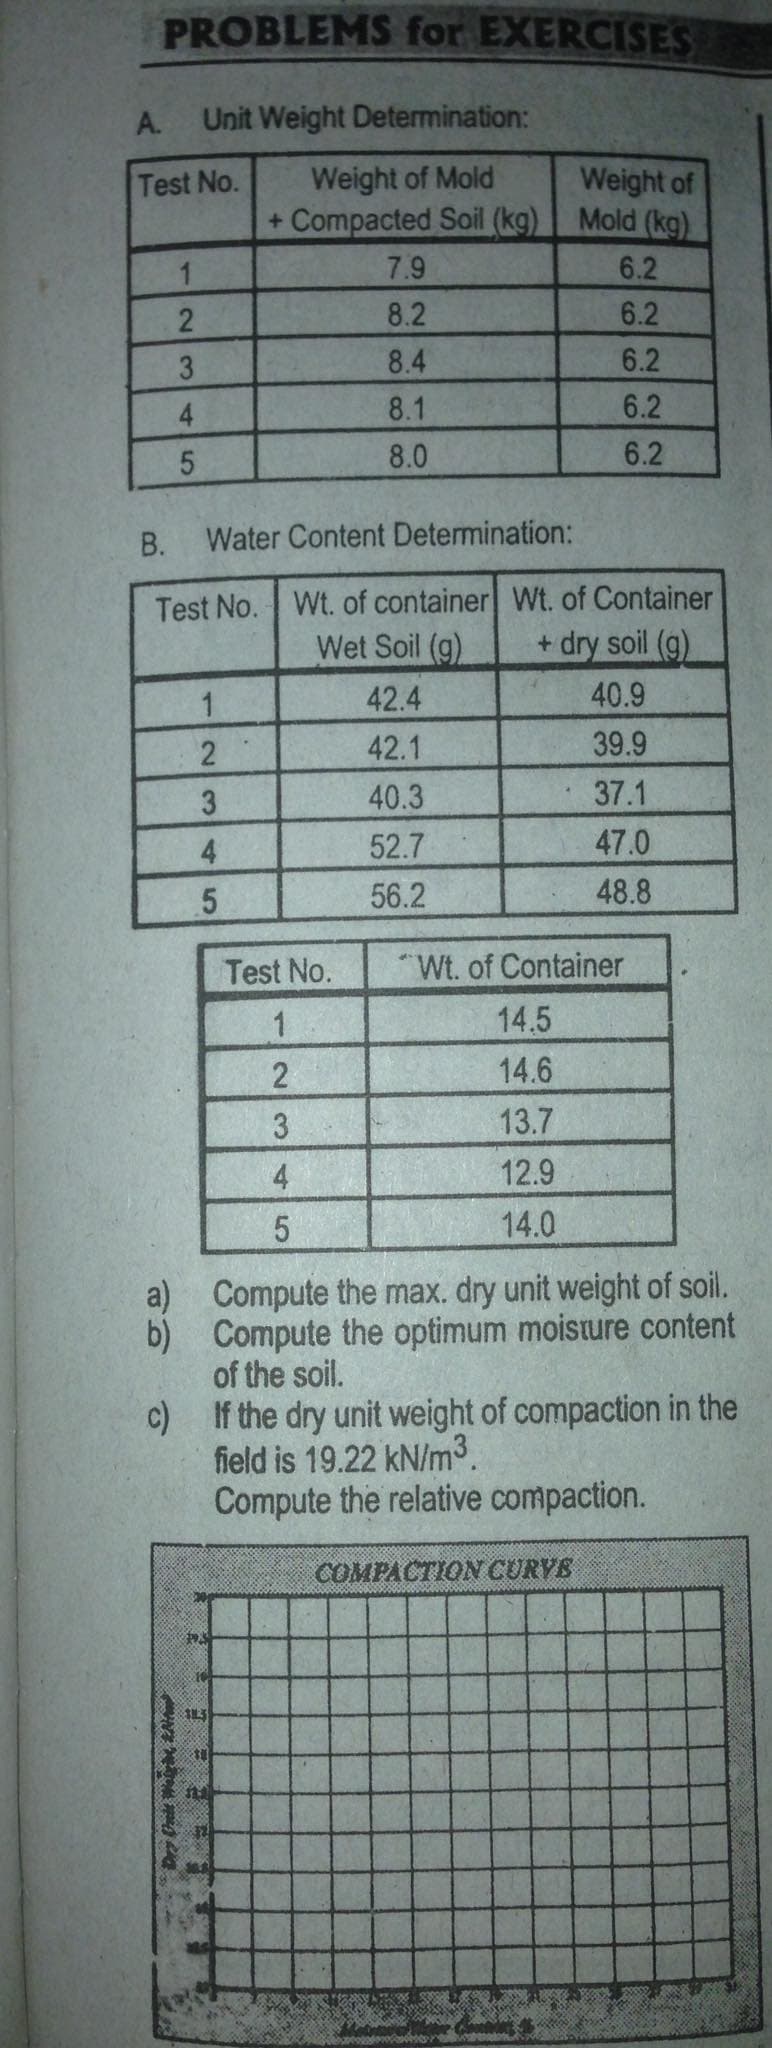 PROBLEMS for EXERCISES
A.
Unit Weight Determination:
Weight of Mold
+ Compacted Soil (kg) Mold (kg)
Test No.
Weight of
1
7.9
6.2
8.2
6.2
8.4
6.2
4
8.1
6.2
8.0
6.2
Water Content Determination:
Test No. Wt. of container Wt. of Container
Wet Soil (g)
+ dry soil (g)
42.4
40.9
42.1
39.9
40.3
37.1
4
52.7
47.0
56.2
48.8
Test No.
"Wt. of Container
14.5
14.6
3
13.7
4
12.9
14.0
a) Compute the max. dry unit weight of soil.
b) Compute the optimum moisture content
of the soil.
c) If the dry unit weight of compaction in the
field is 19.22 kN/m3.
Compute the relative compaction.
COMPACTION CURVE
6666
23
B.
